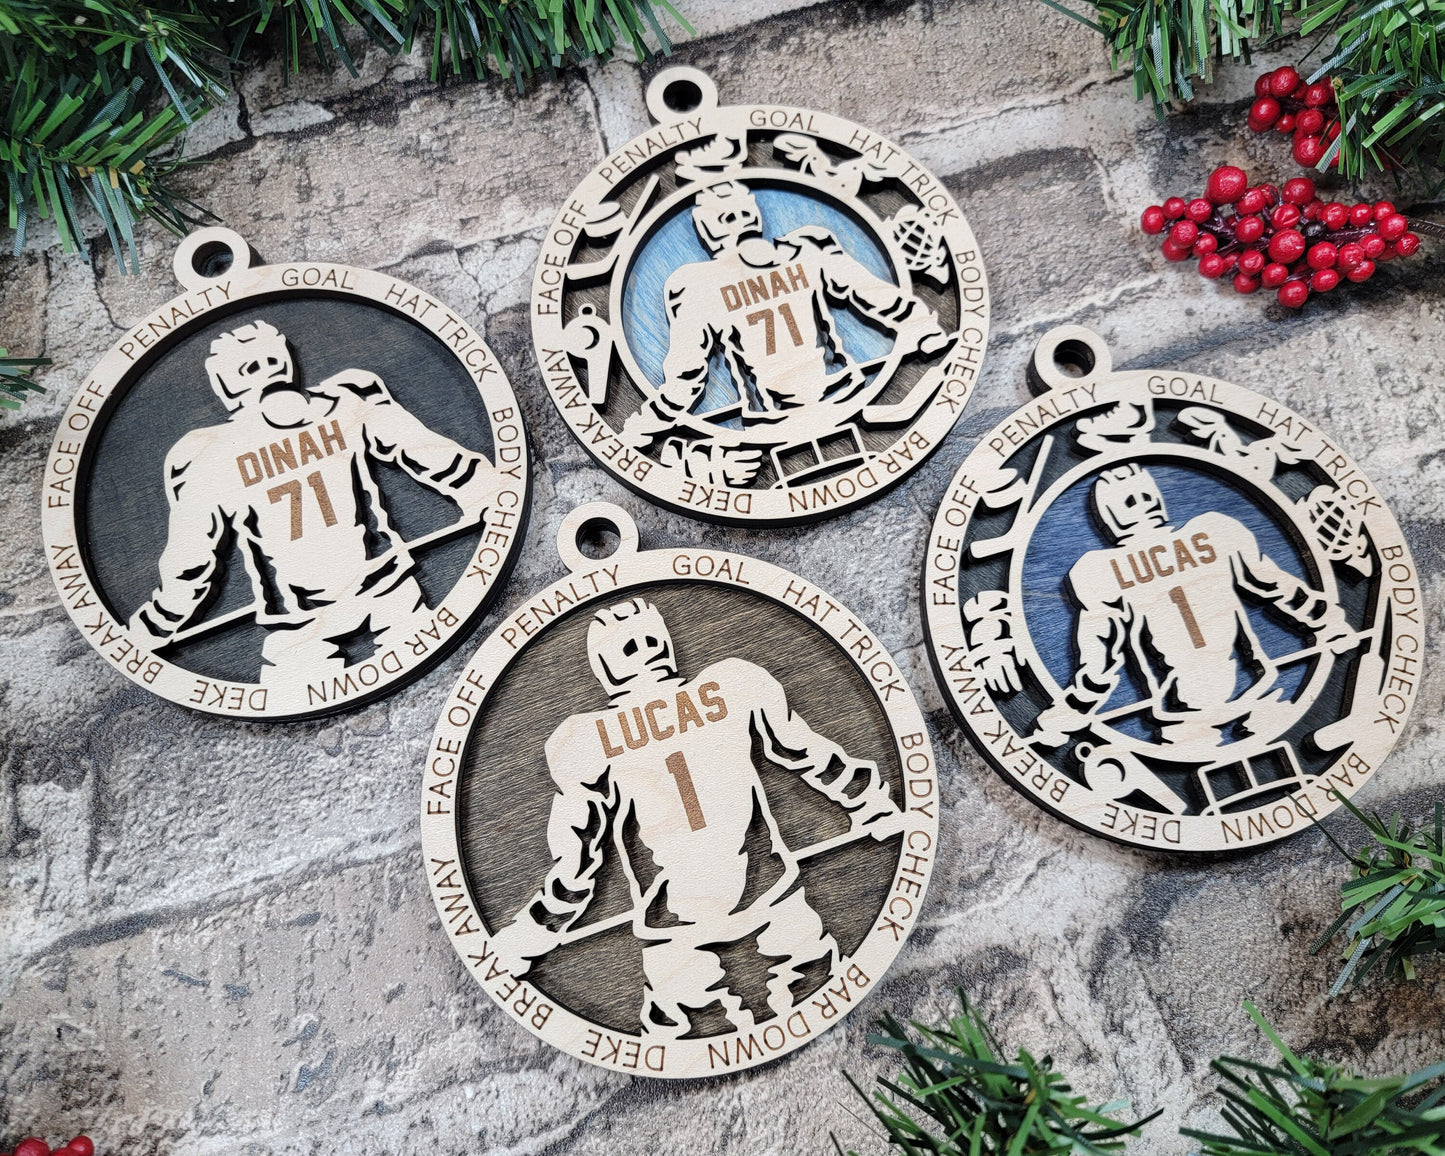 Hockey Sports Ornaments - Laser cut and engraved decorations